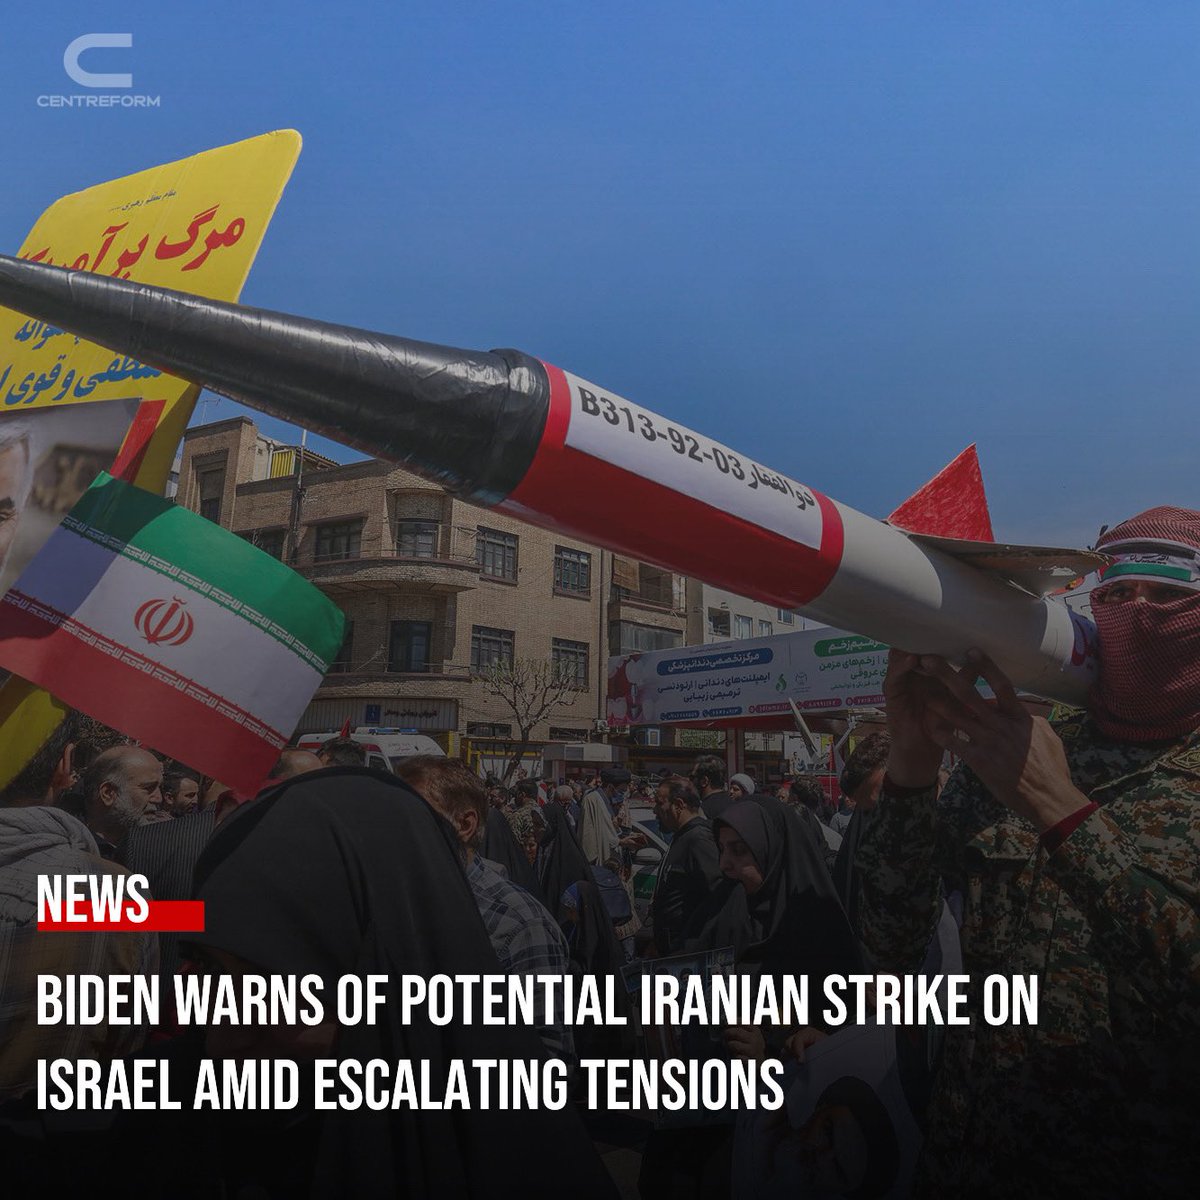 President Biden expressed concerns over a possible Iranian strike on Israel, emphasizing U.S. support for Israel’s defense. As Iran prepares for retaliation following the bombing of its consulate in Damascus, the U.S. deploys troops and assets to the Middle East to deter